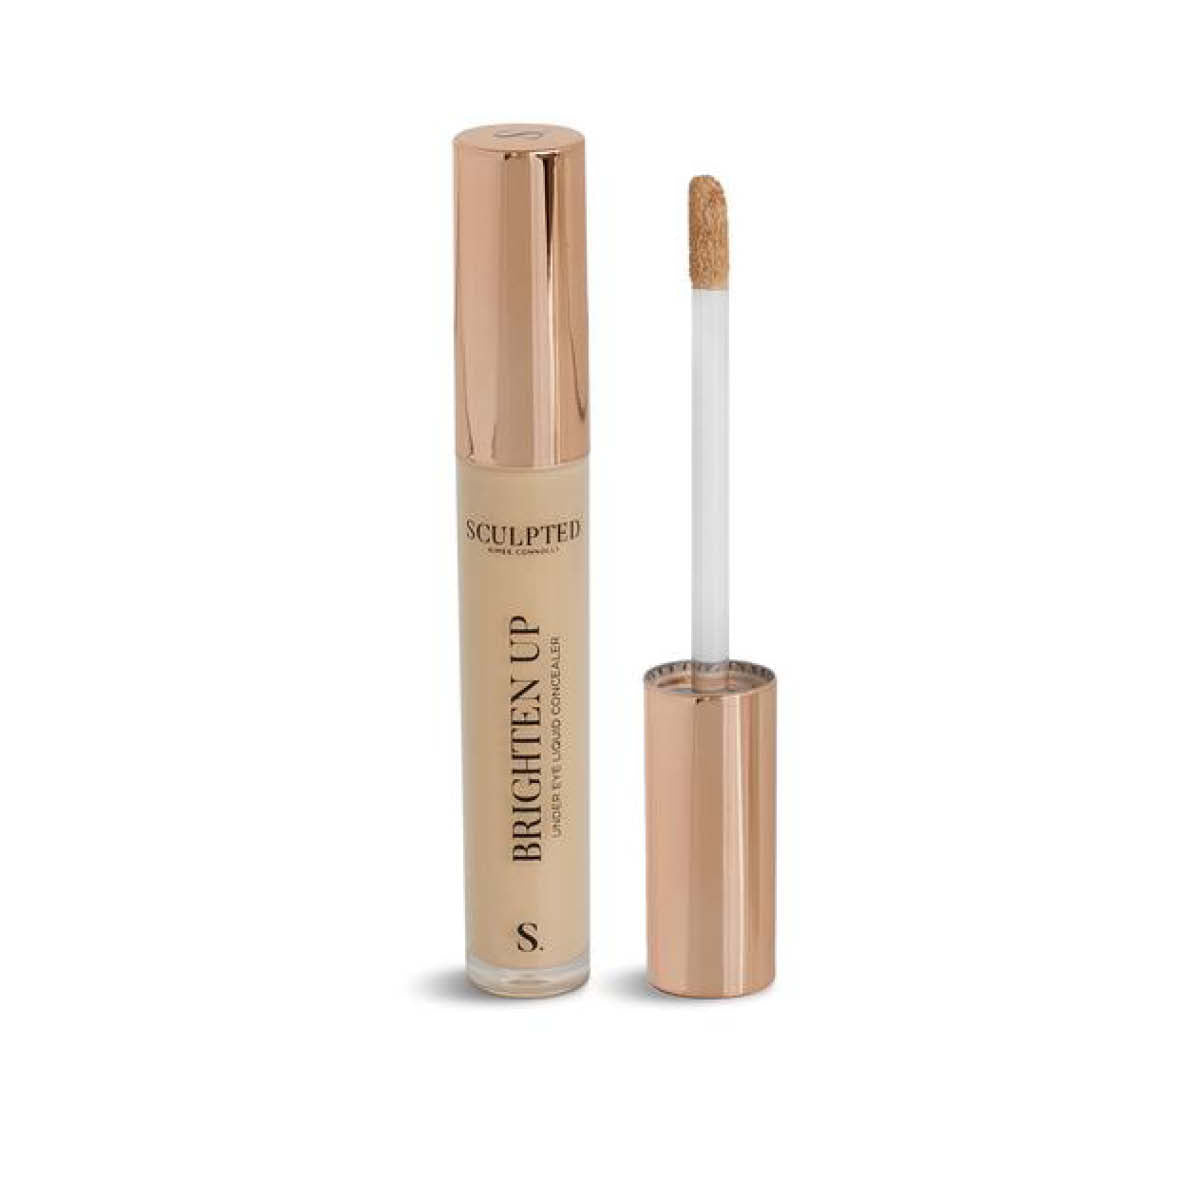 Sculpted By Aimee Connolly Brighten Up Liquid Concealer